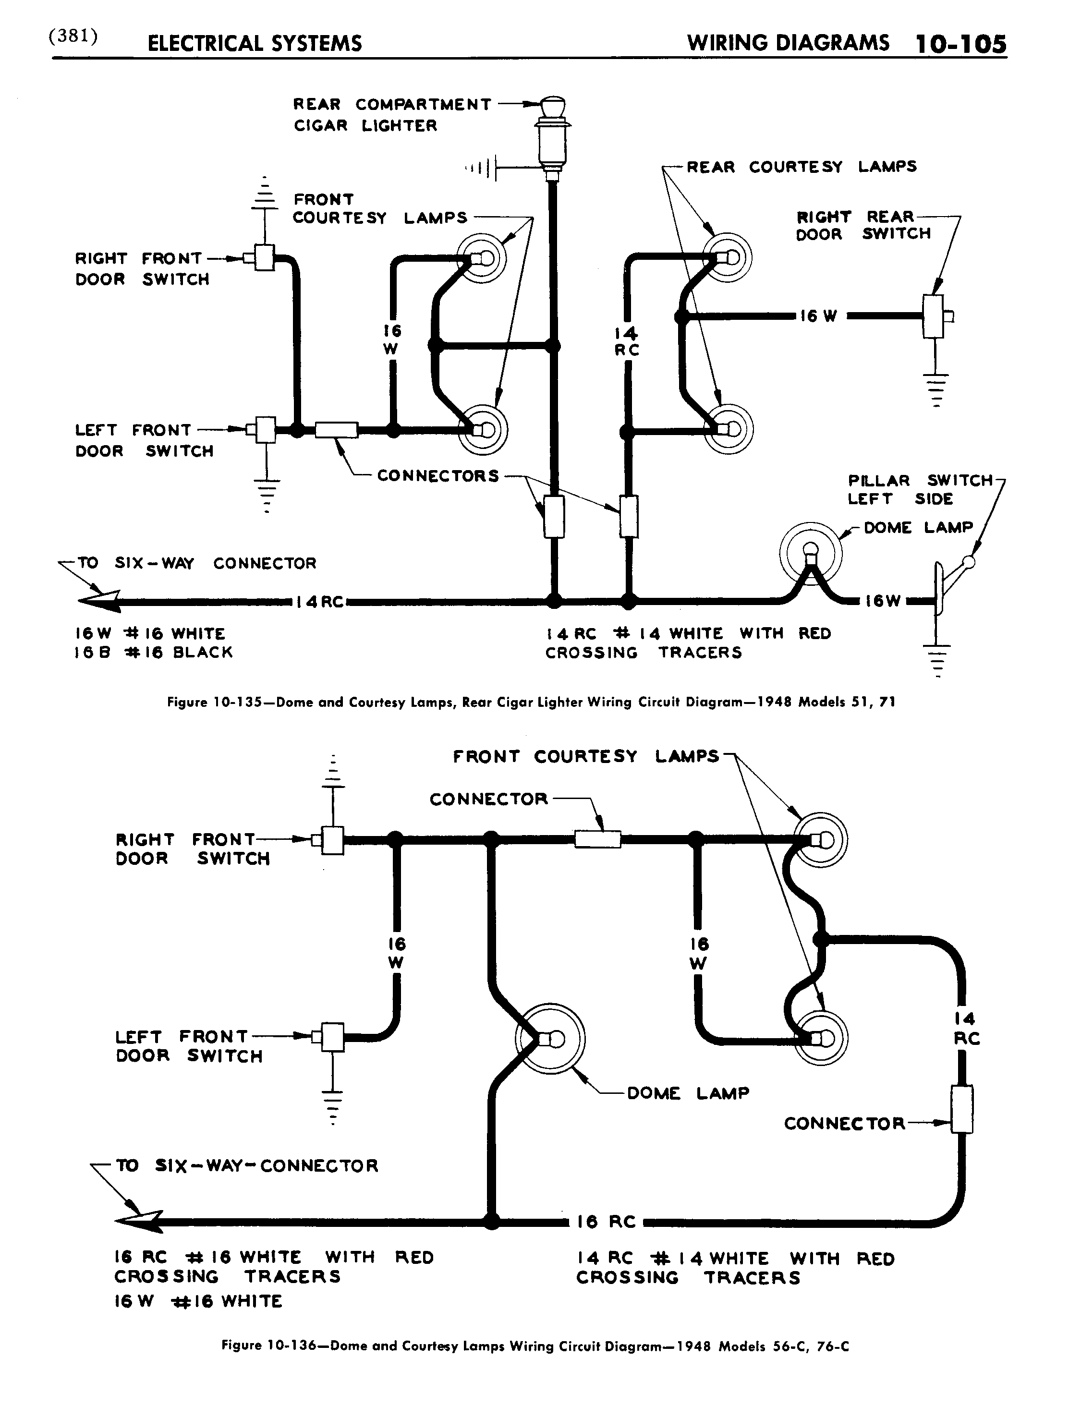 n_11 1948 Buick Shop Manual - Electrical Systems-105-105.jpg